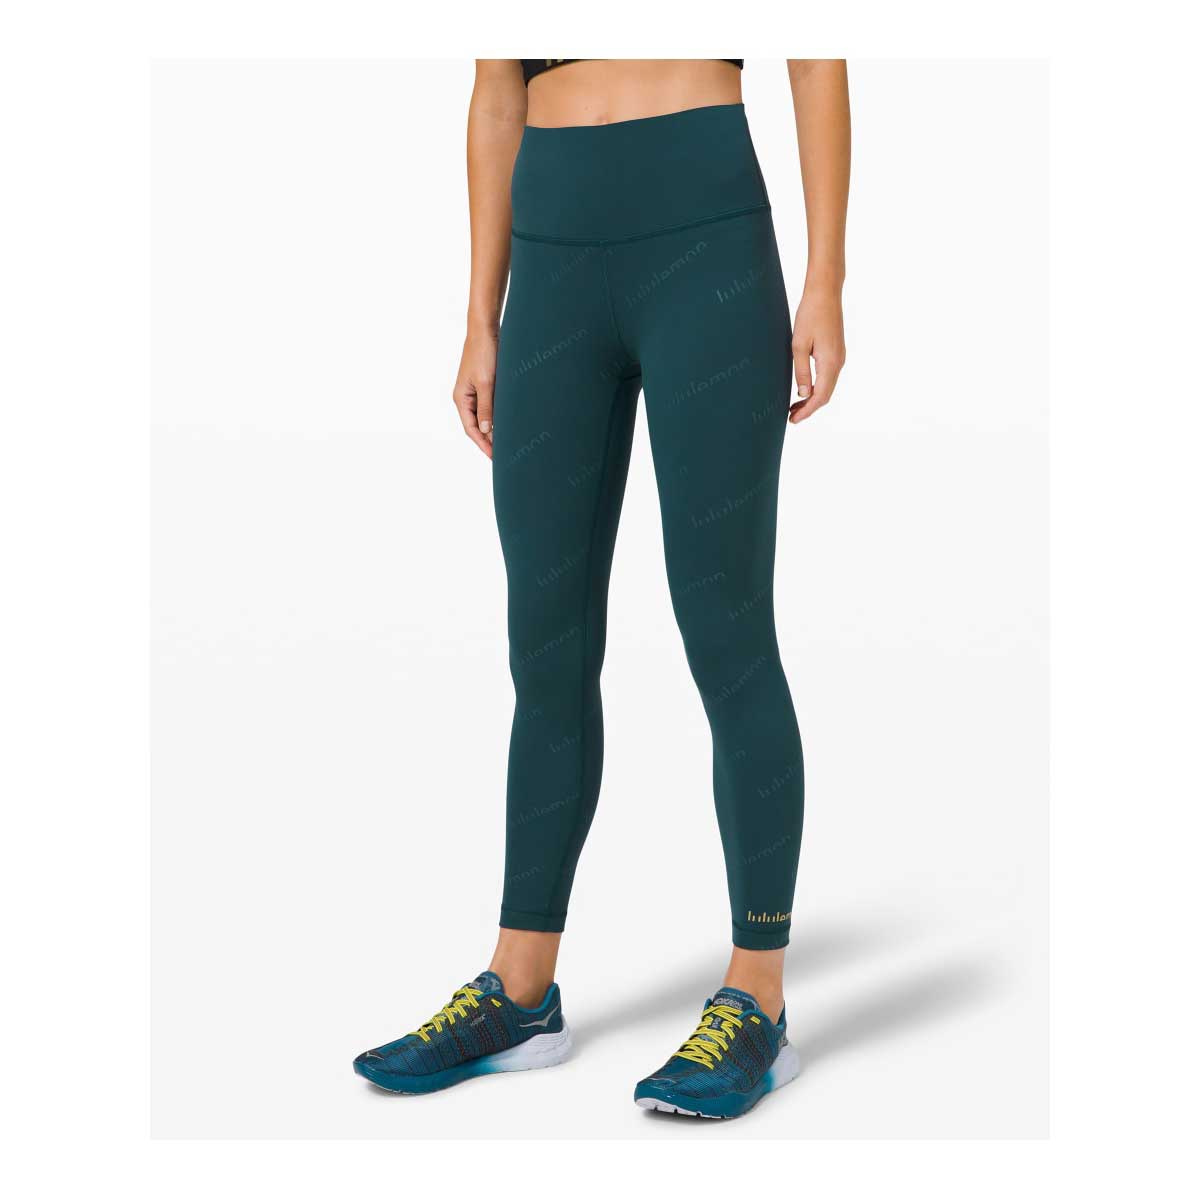 Which Lululemon Leggings Have The Best Compression